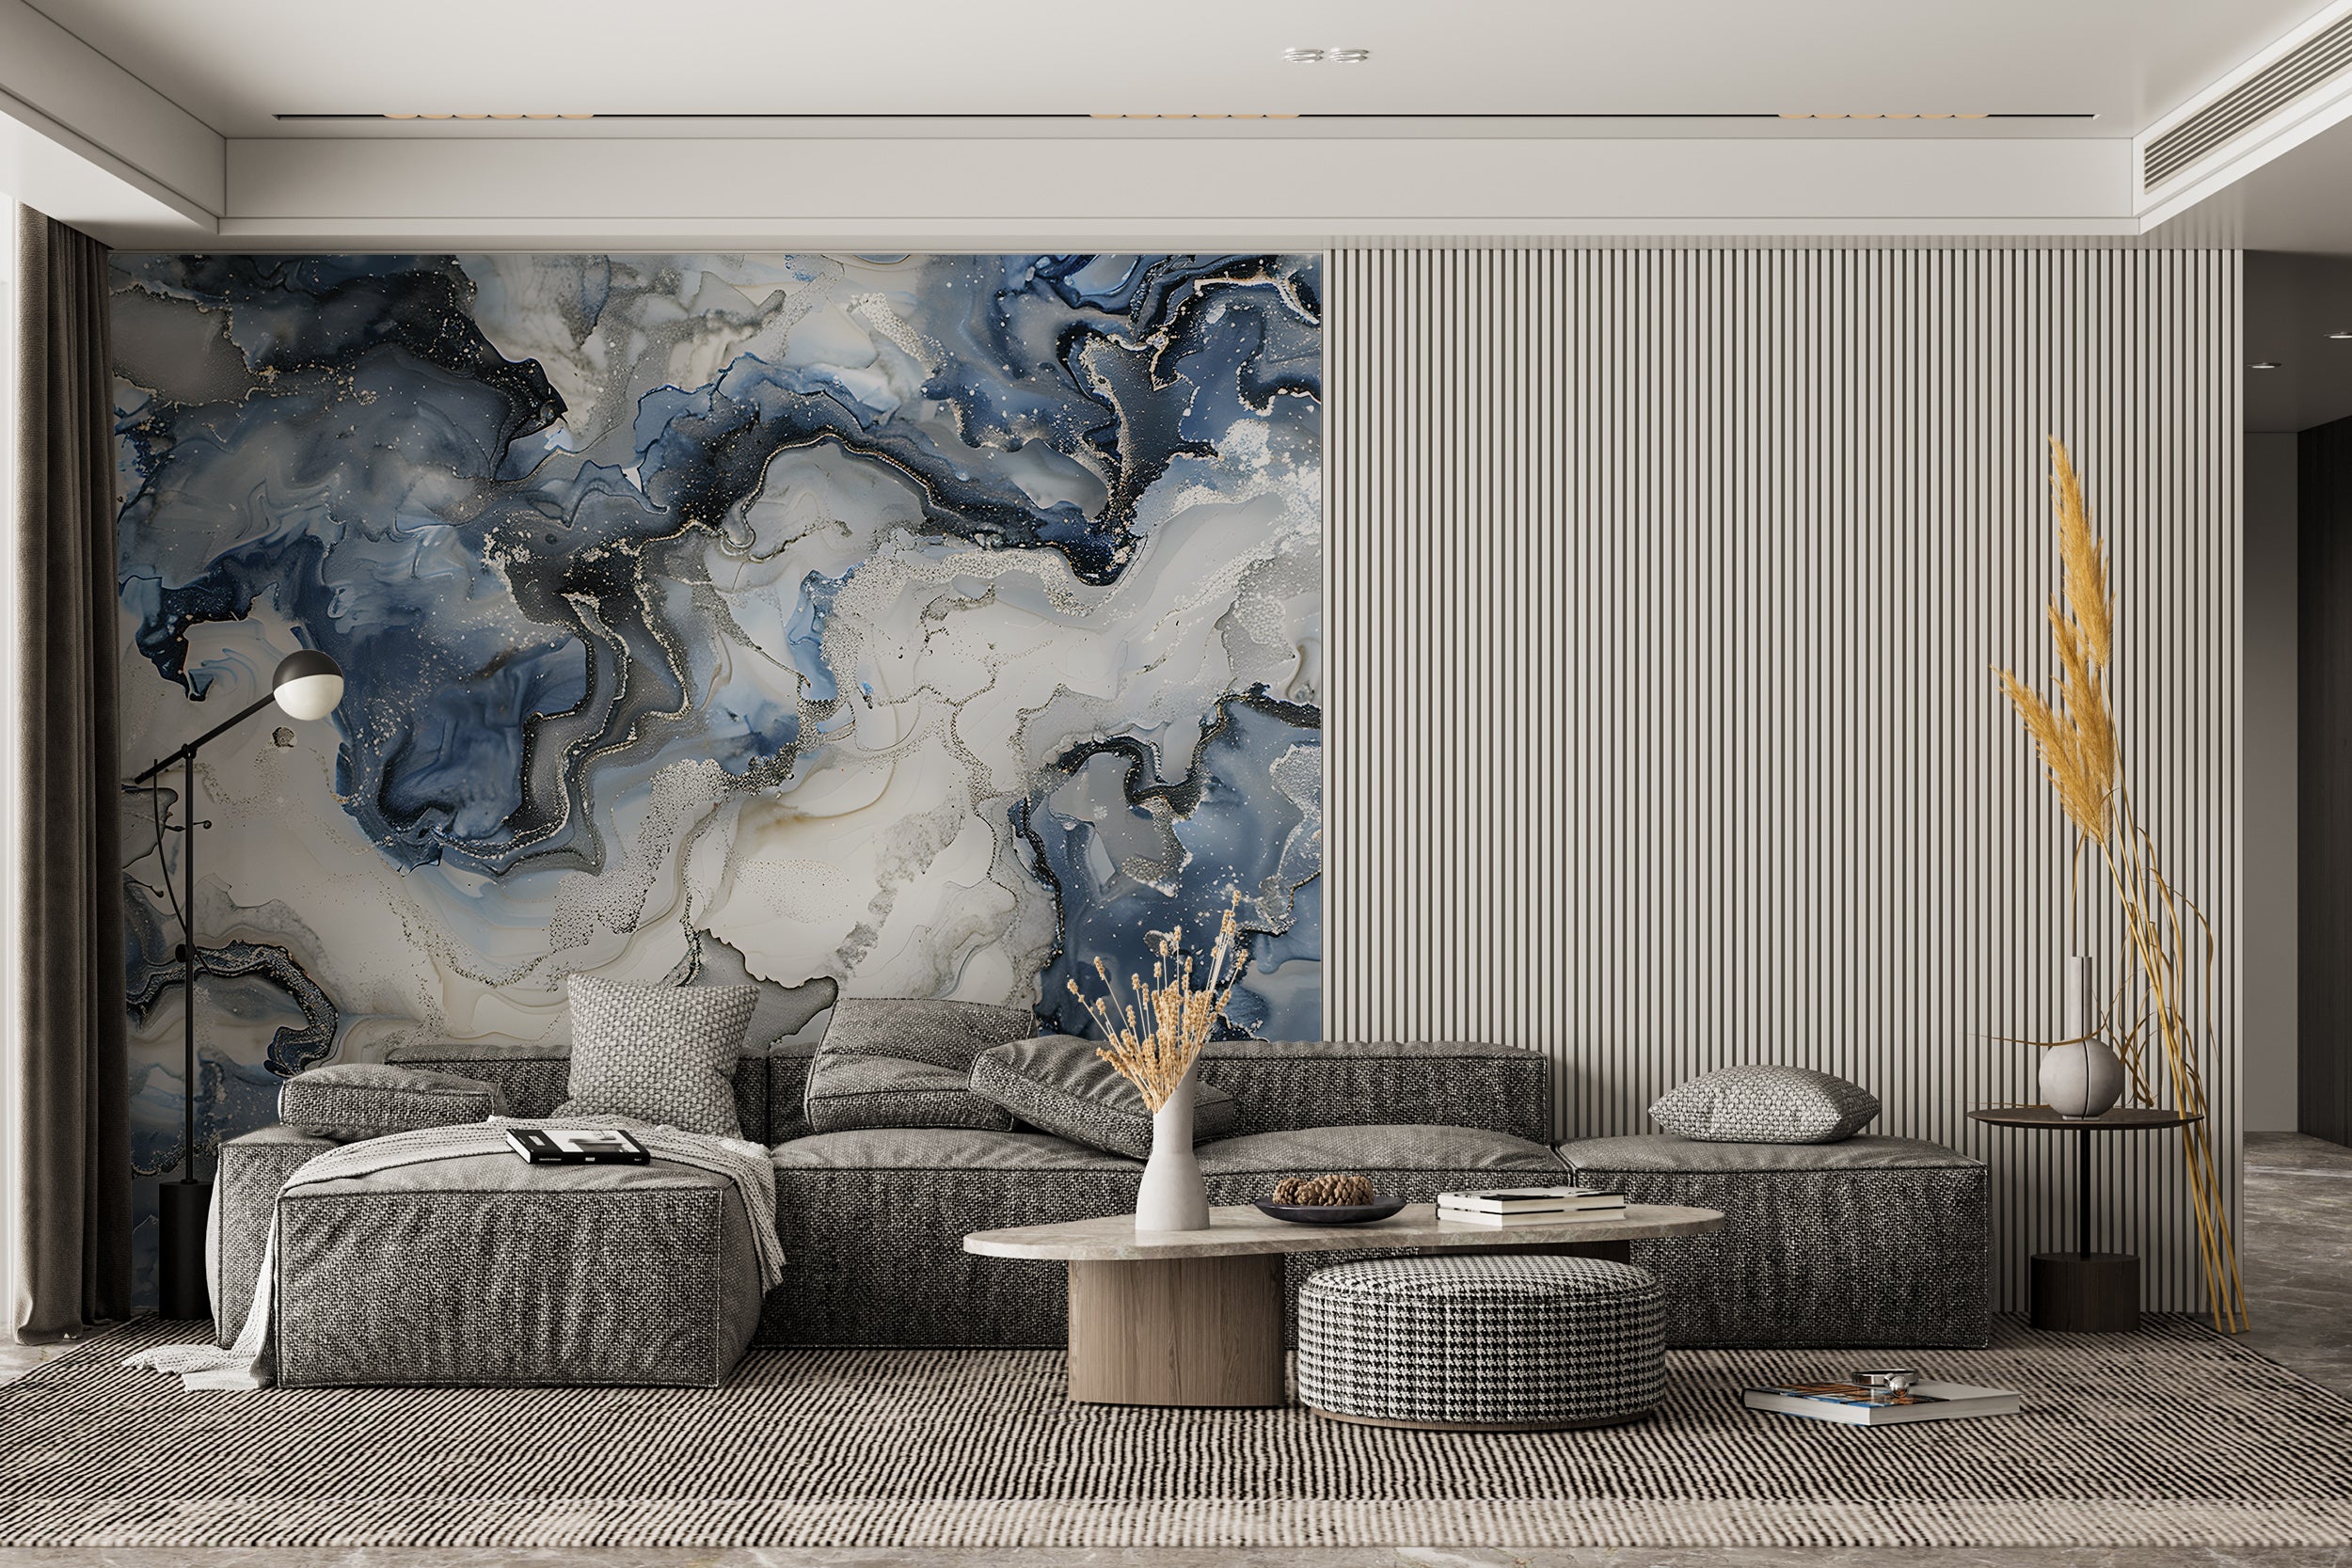 Blue and White Marble Wallpaper, Alcohol ink wall mural, Abstract Peel and Stick Stone Wallpaper, Blue & Silver Removable Modern Art